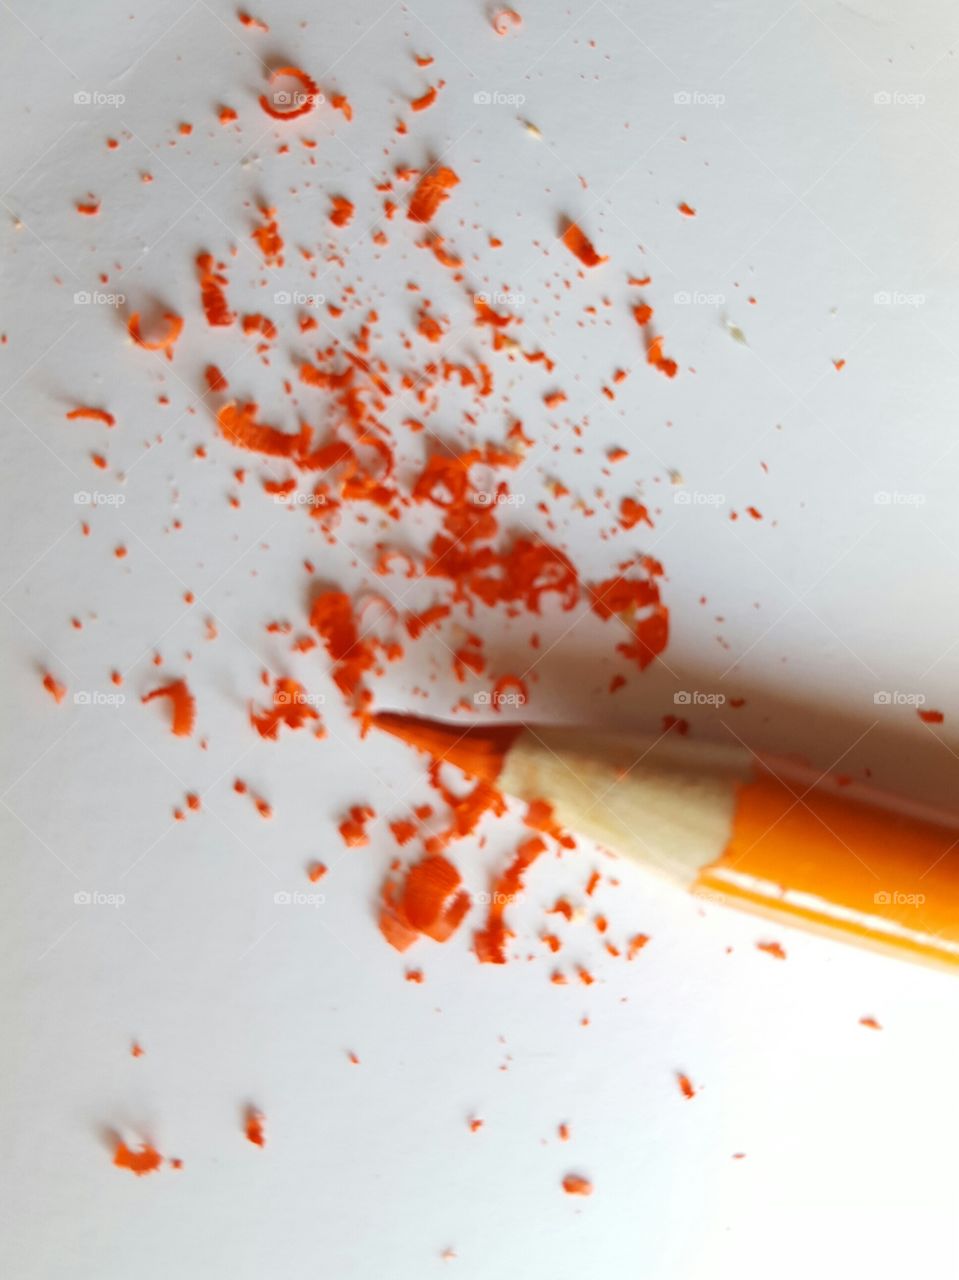 Orange Colored Pencil with Shavings